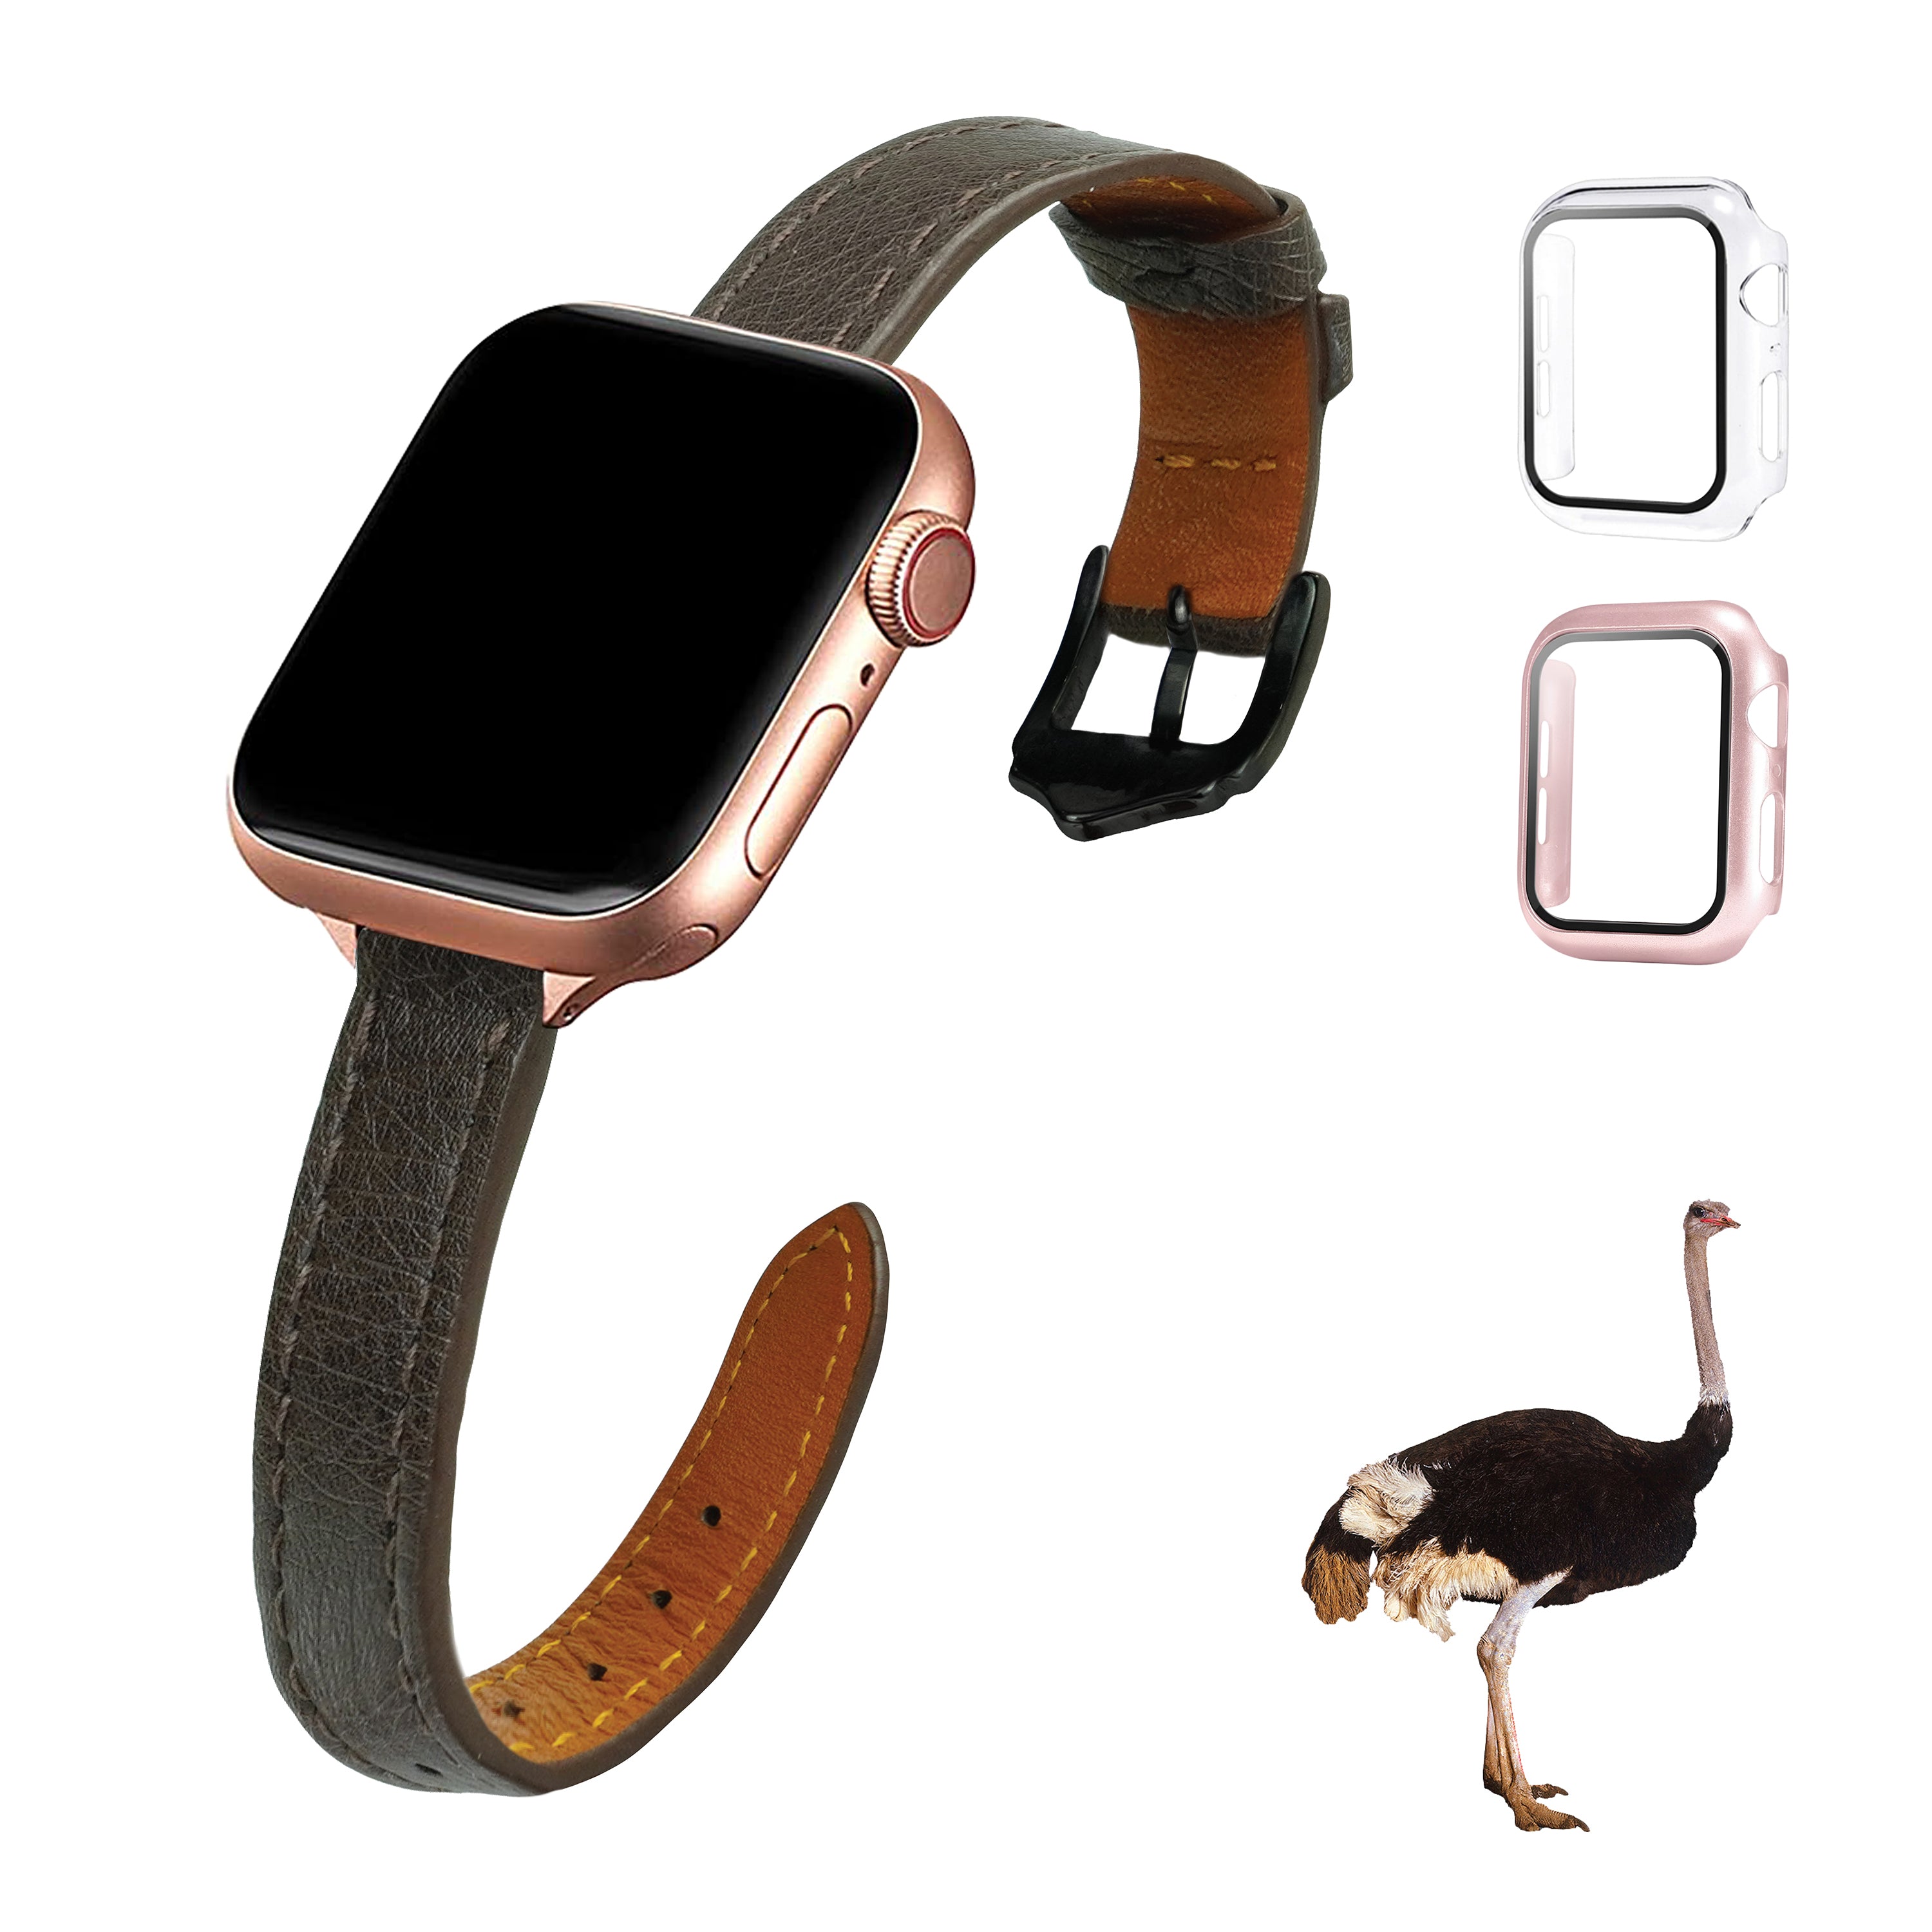 Dark Brown Flat Ostrich Leather Band Compatible Apple Watch Iwatch 42mm Screen Protector Case Black Adapter Replacement Strap For Smartwatch Series 1 2 3 Leather Handmade AW-183B-W-42MM